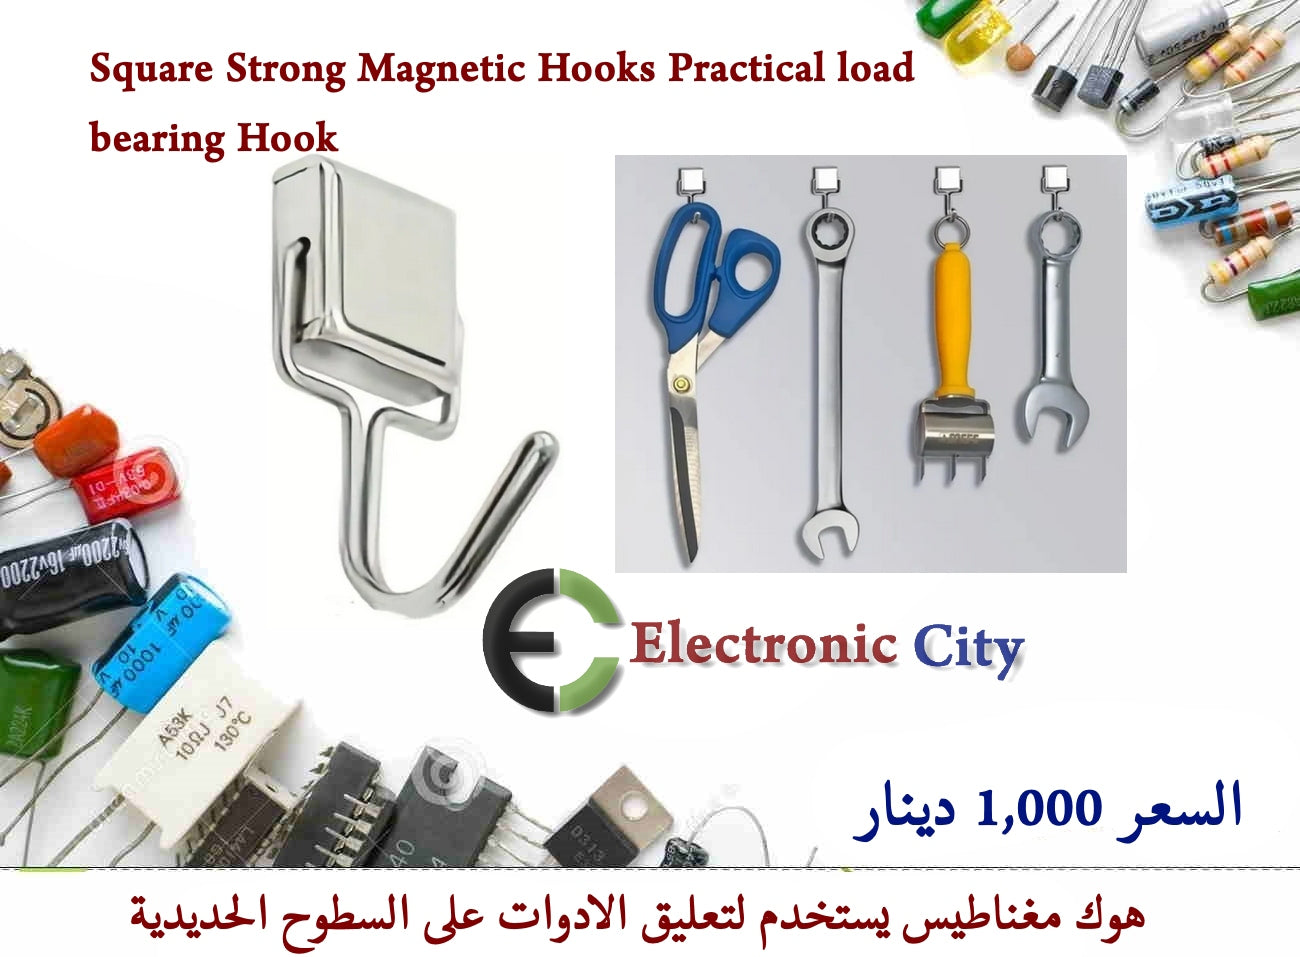 Square Strong Magnetic Hooks Practical load bearing Hook  #F8 GXRA0718-004